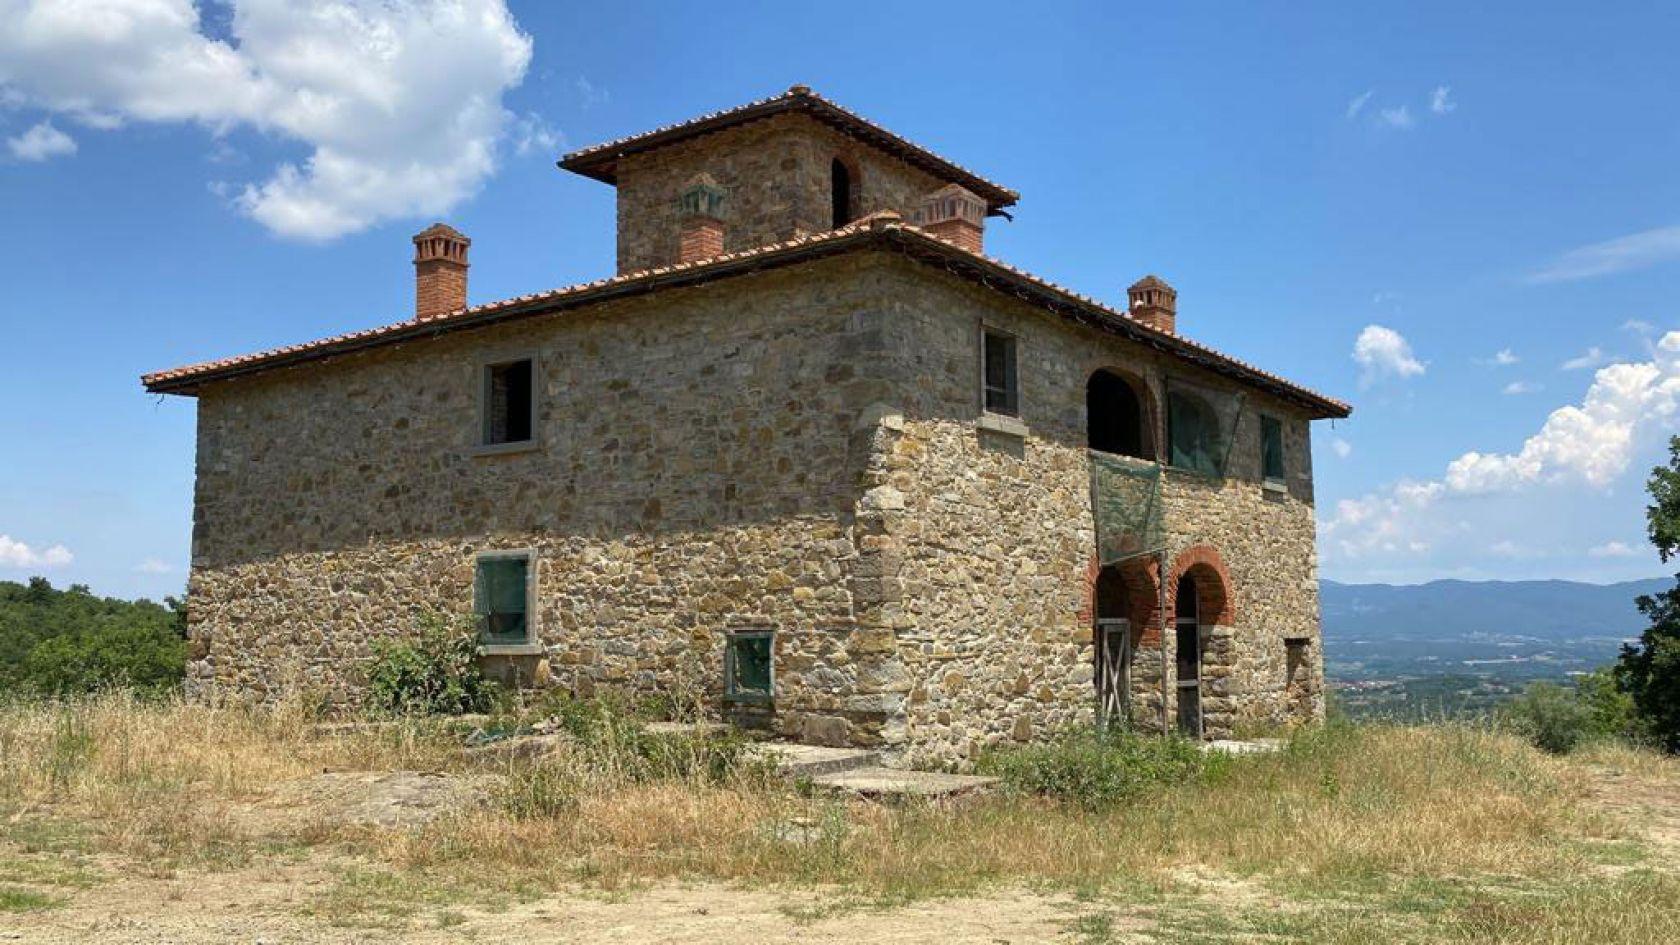 Toscana Immobiliare - Tuscan country house, stone villa for sale near Florence, Pergine Valdarno